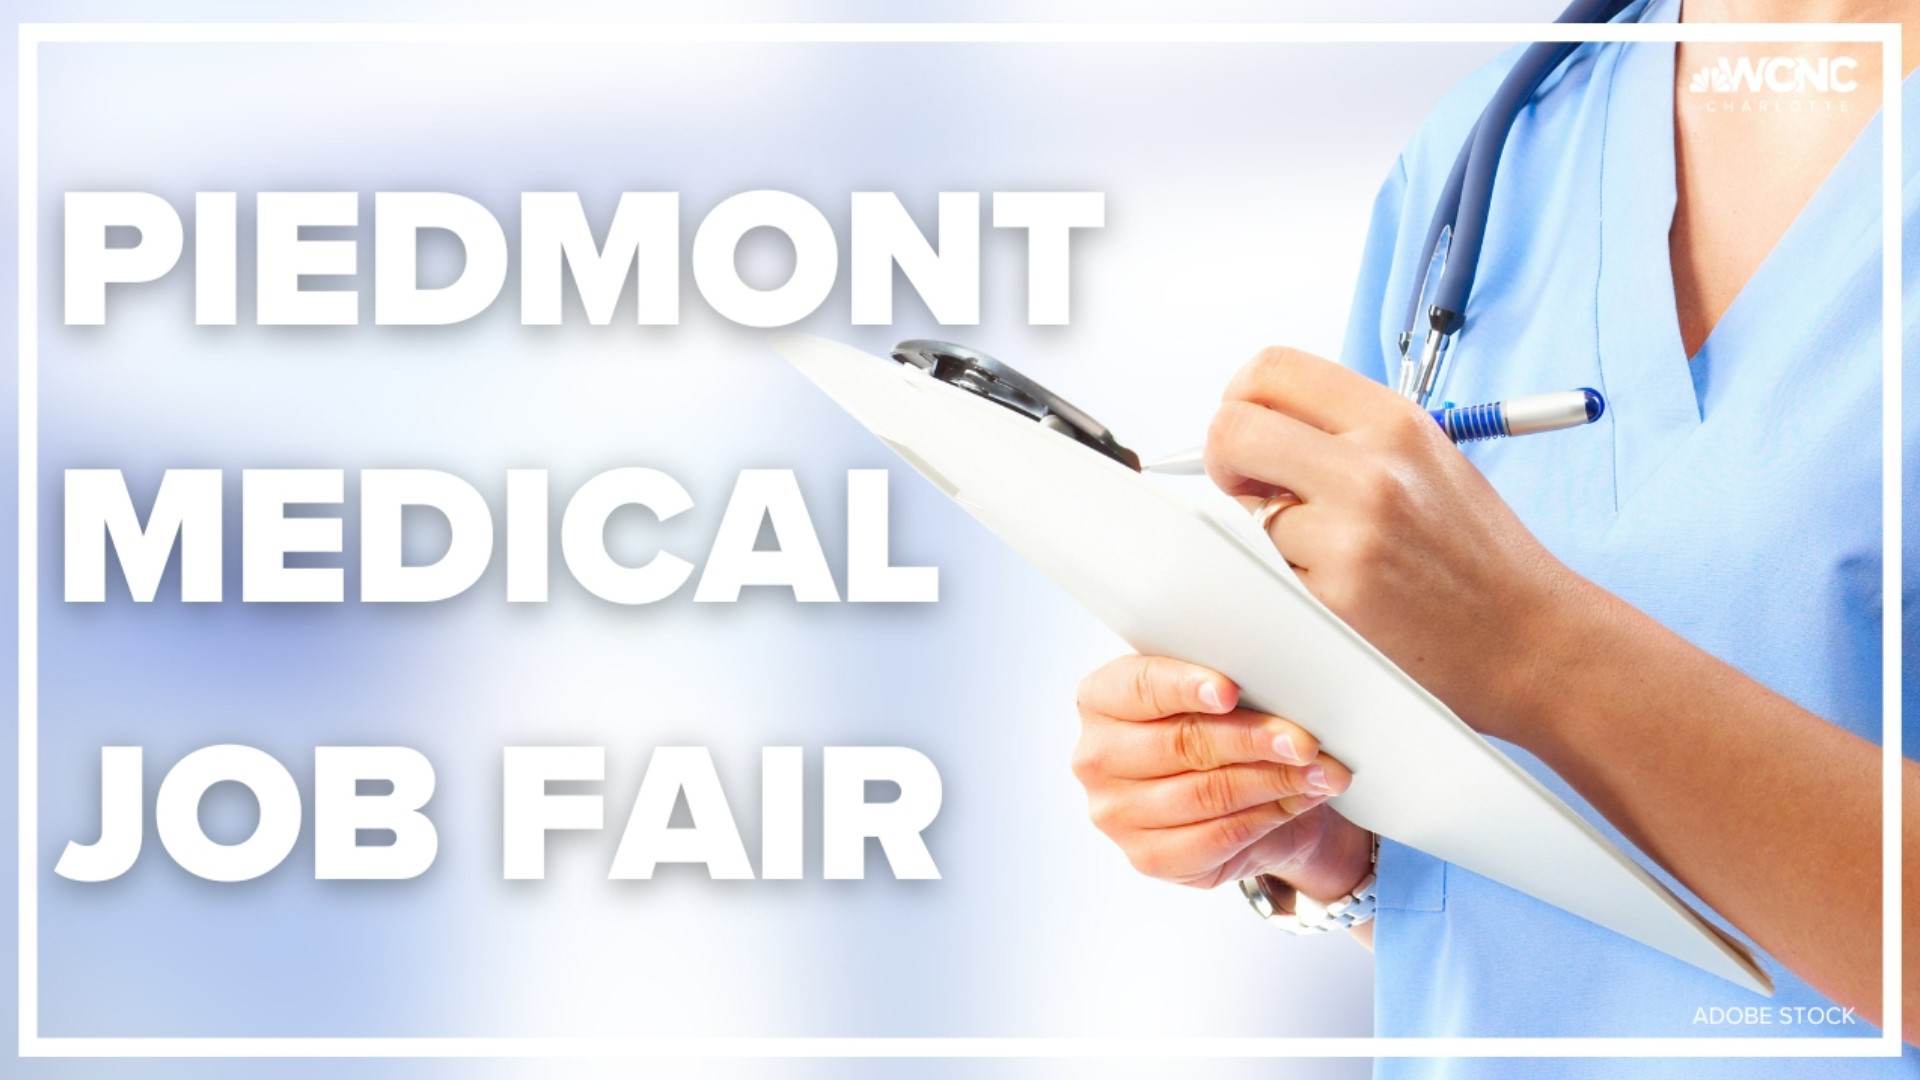 Piedmont Medical Center is hosting a job fair for its locations in Fort Mill and Rock Hill. The job fair gets started at 8 a.m. Tuesday.